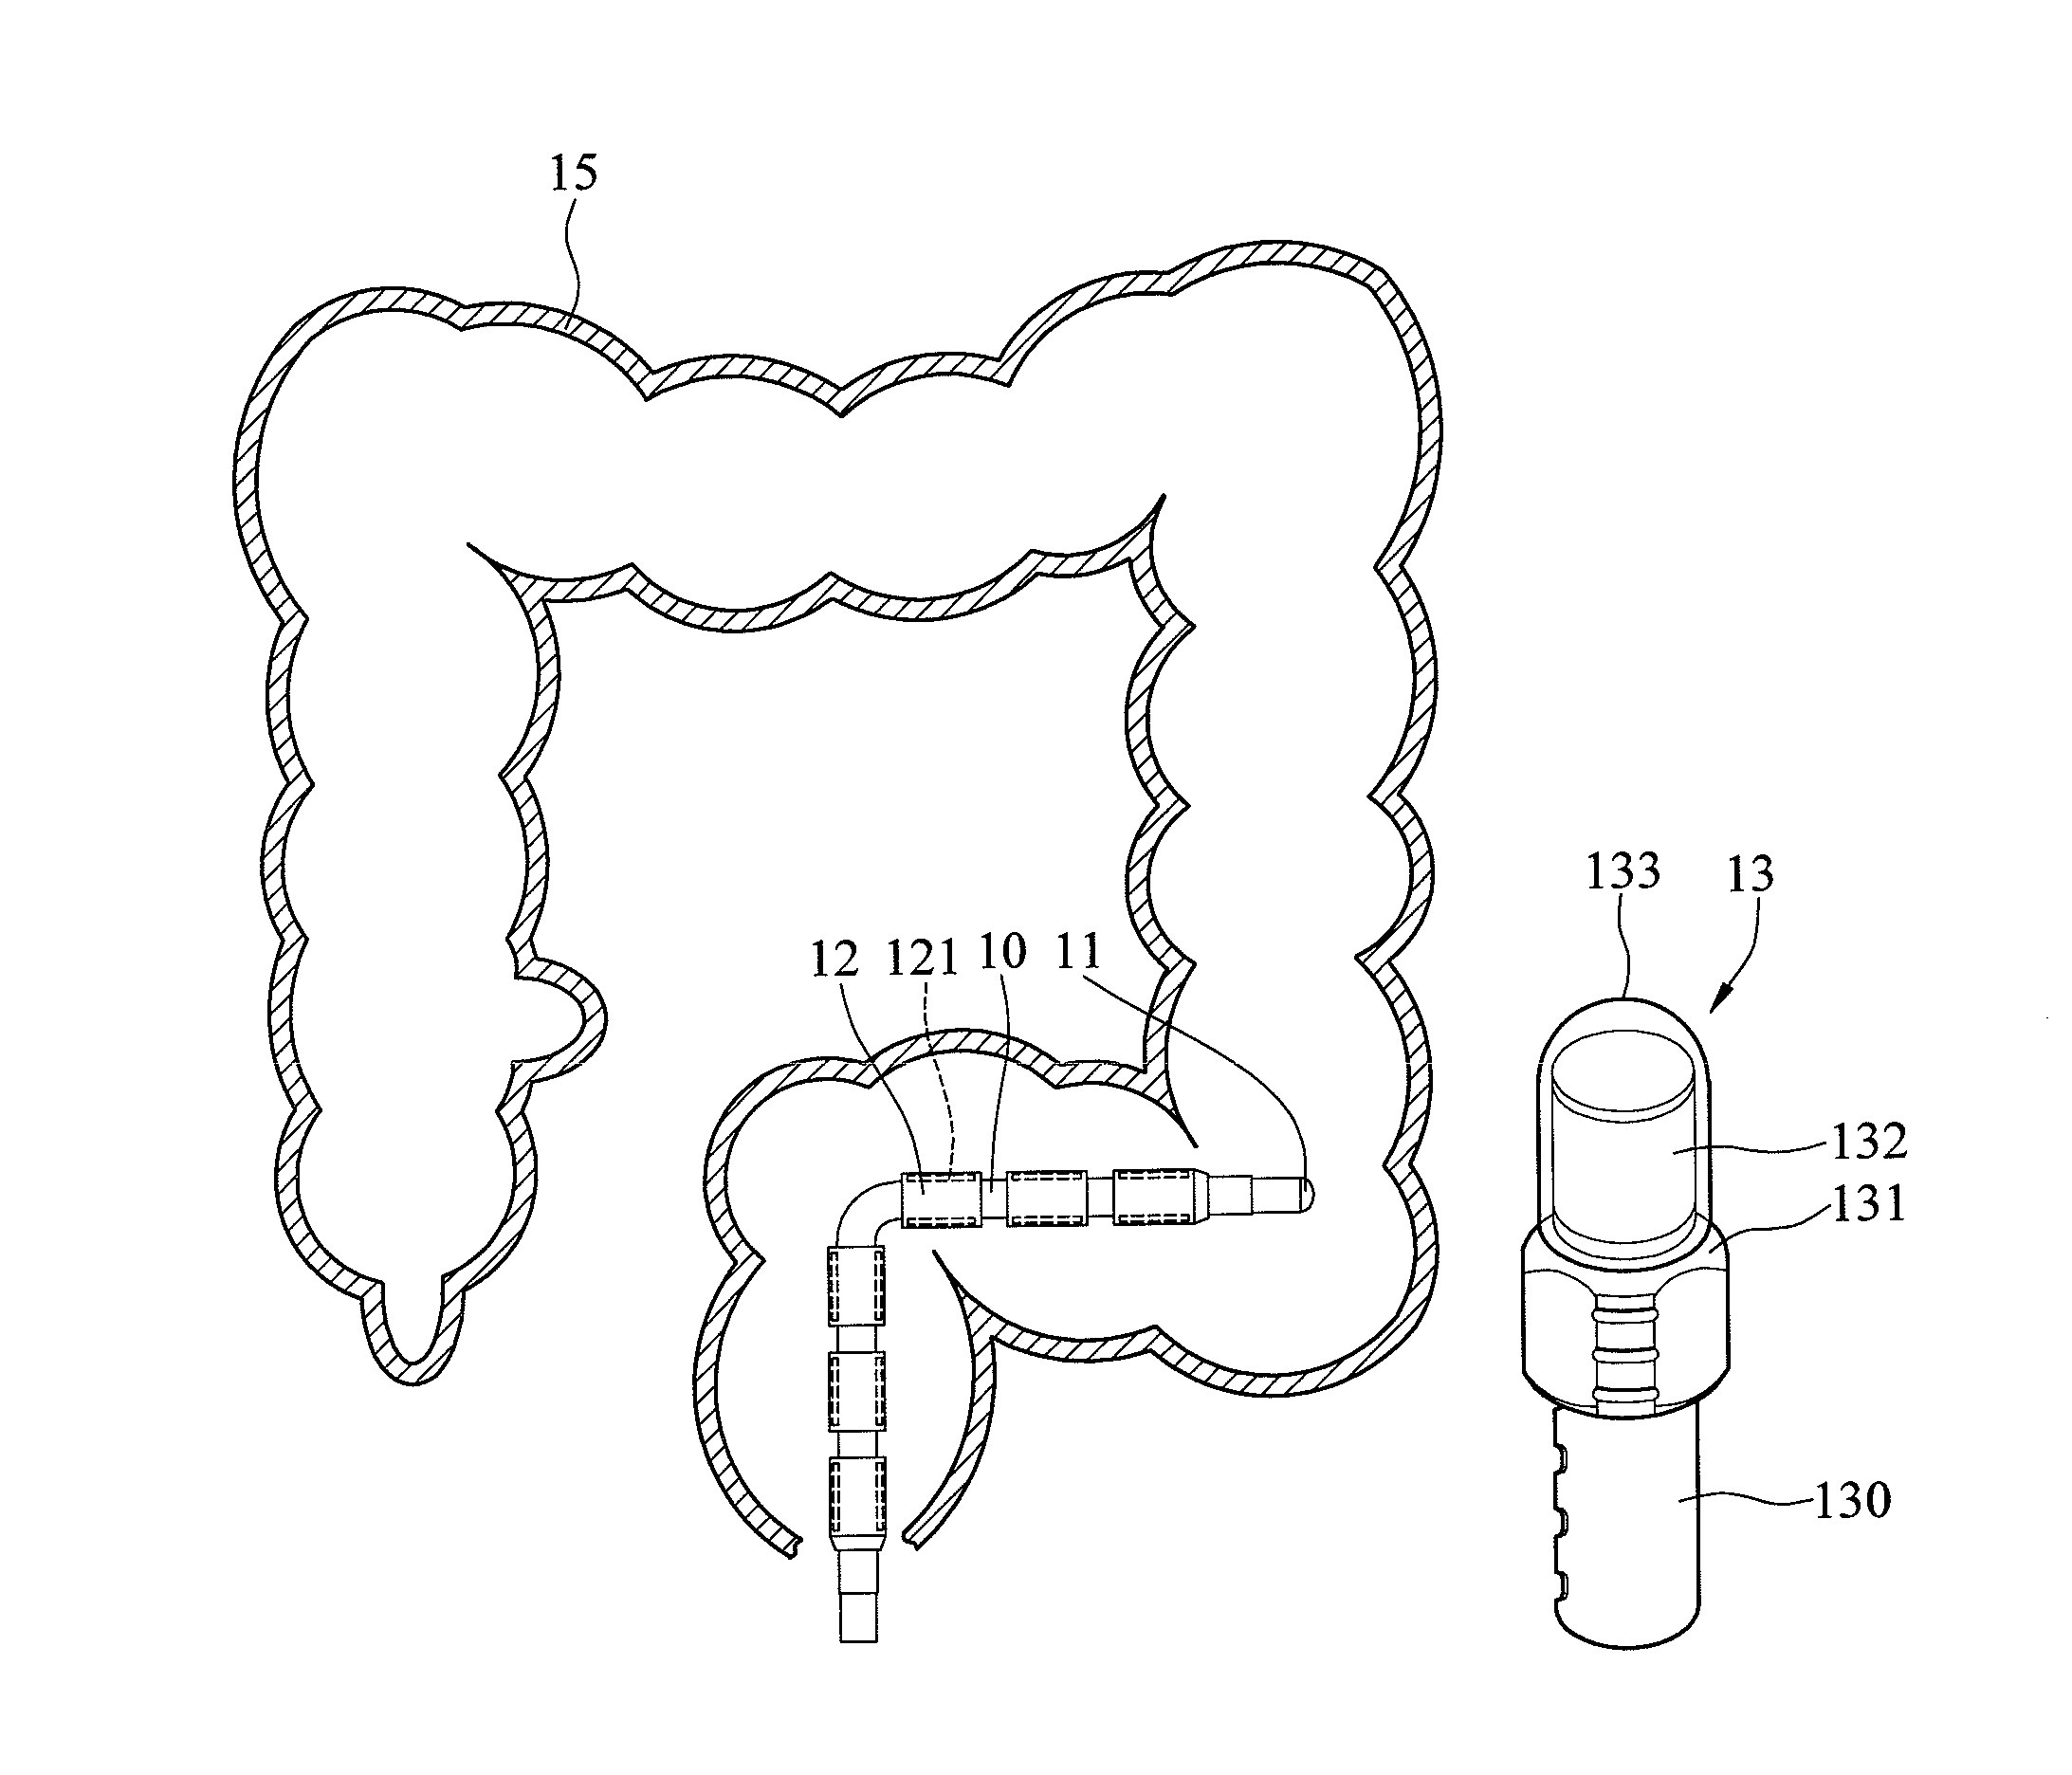 Magnetic-controlled system applicable for colonoscopy